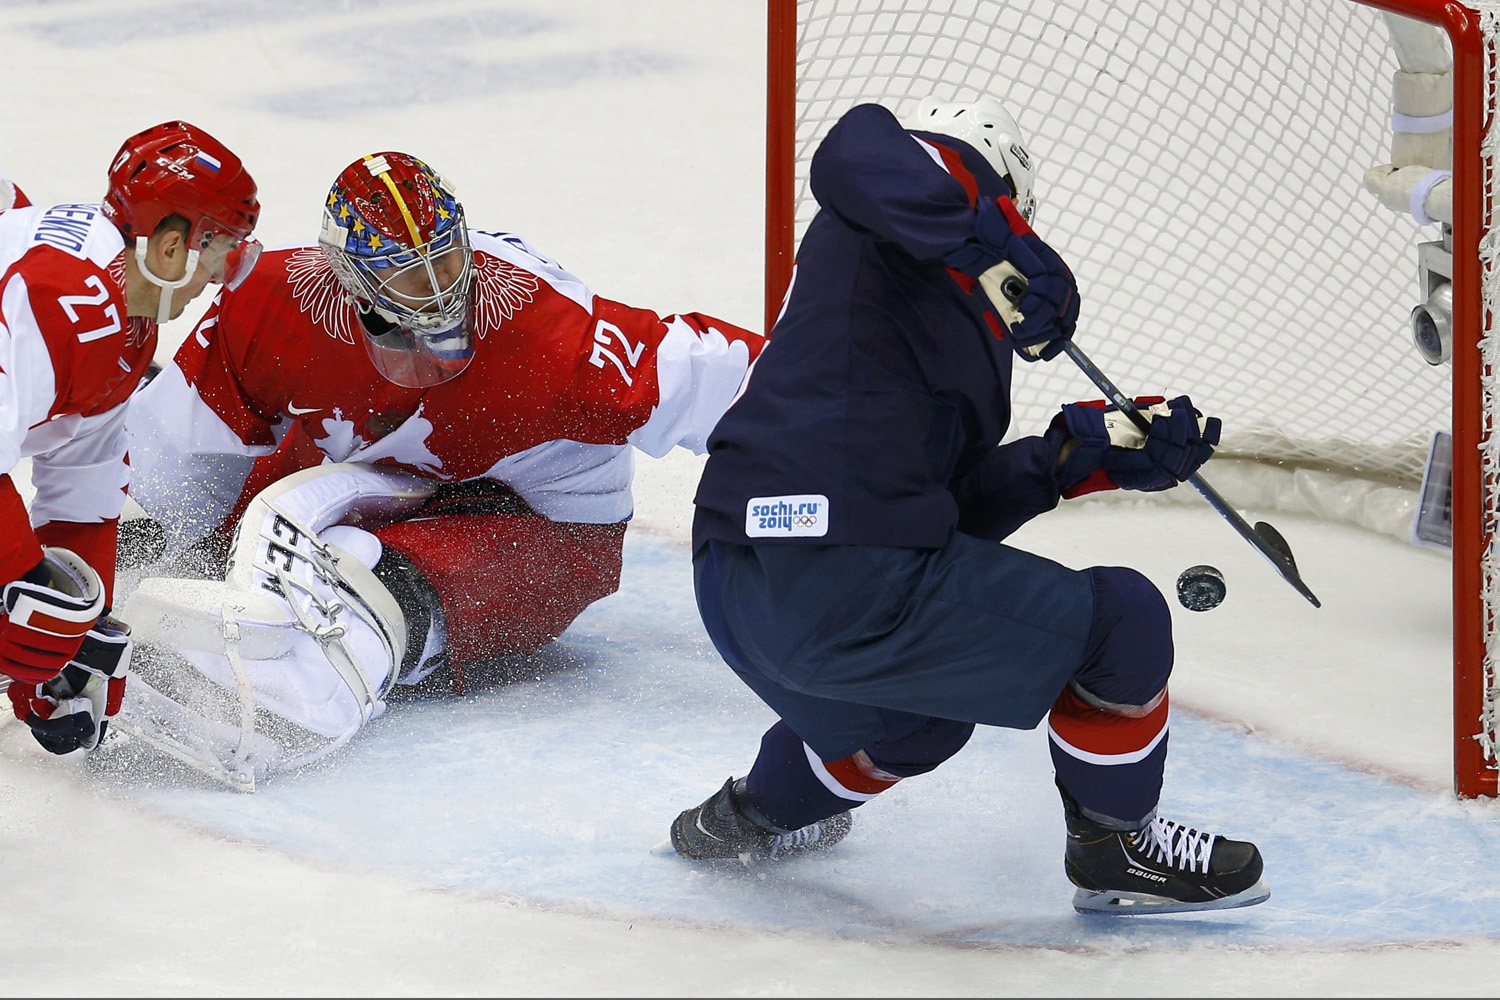 Team USA's Fowler scores on Russia's goalie Bobrovski and Russia's Tereshenko during the second period of their men's preliminary round ice hockey game at the 2014 Sochi Winter Olympics